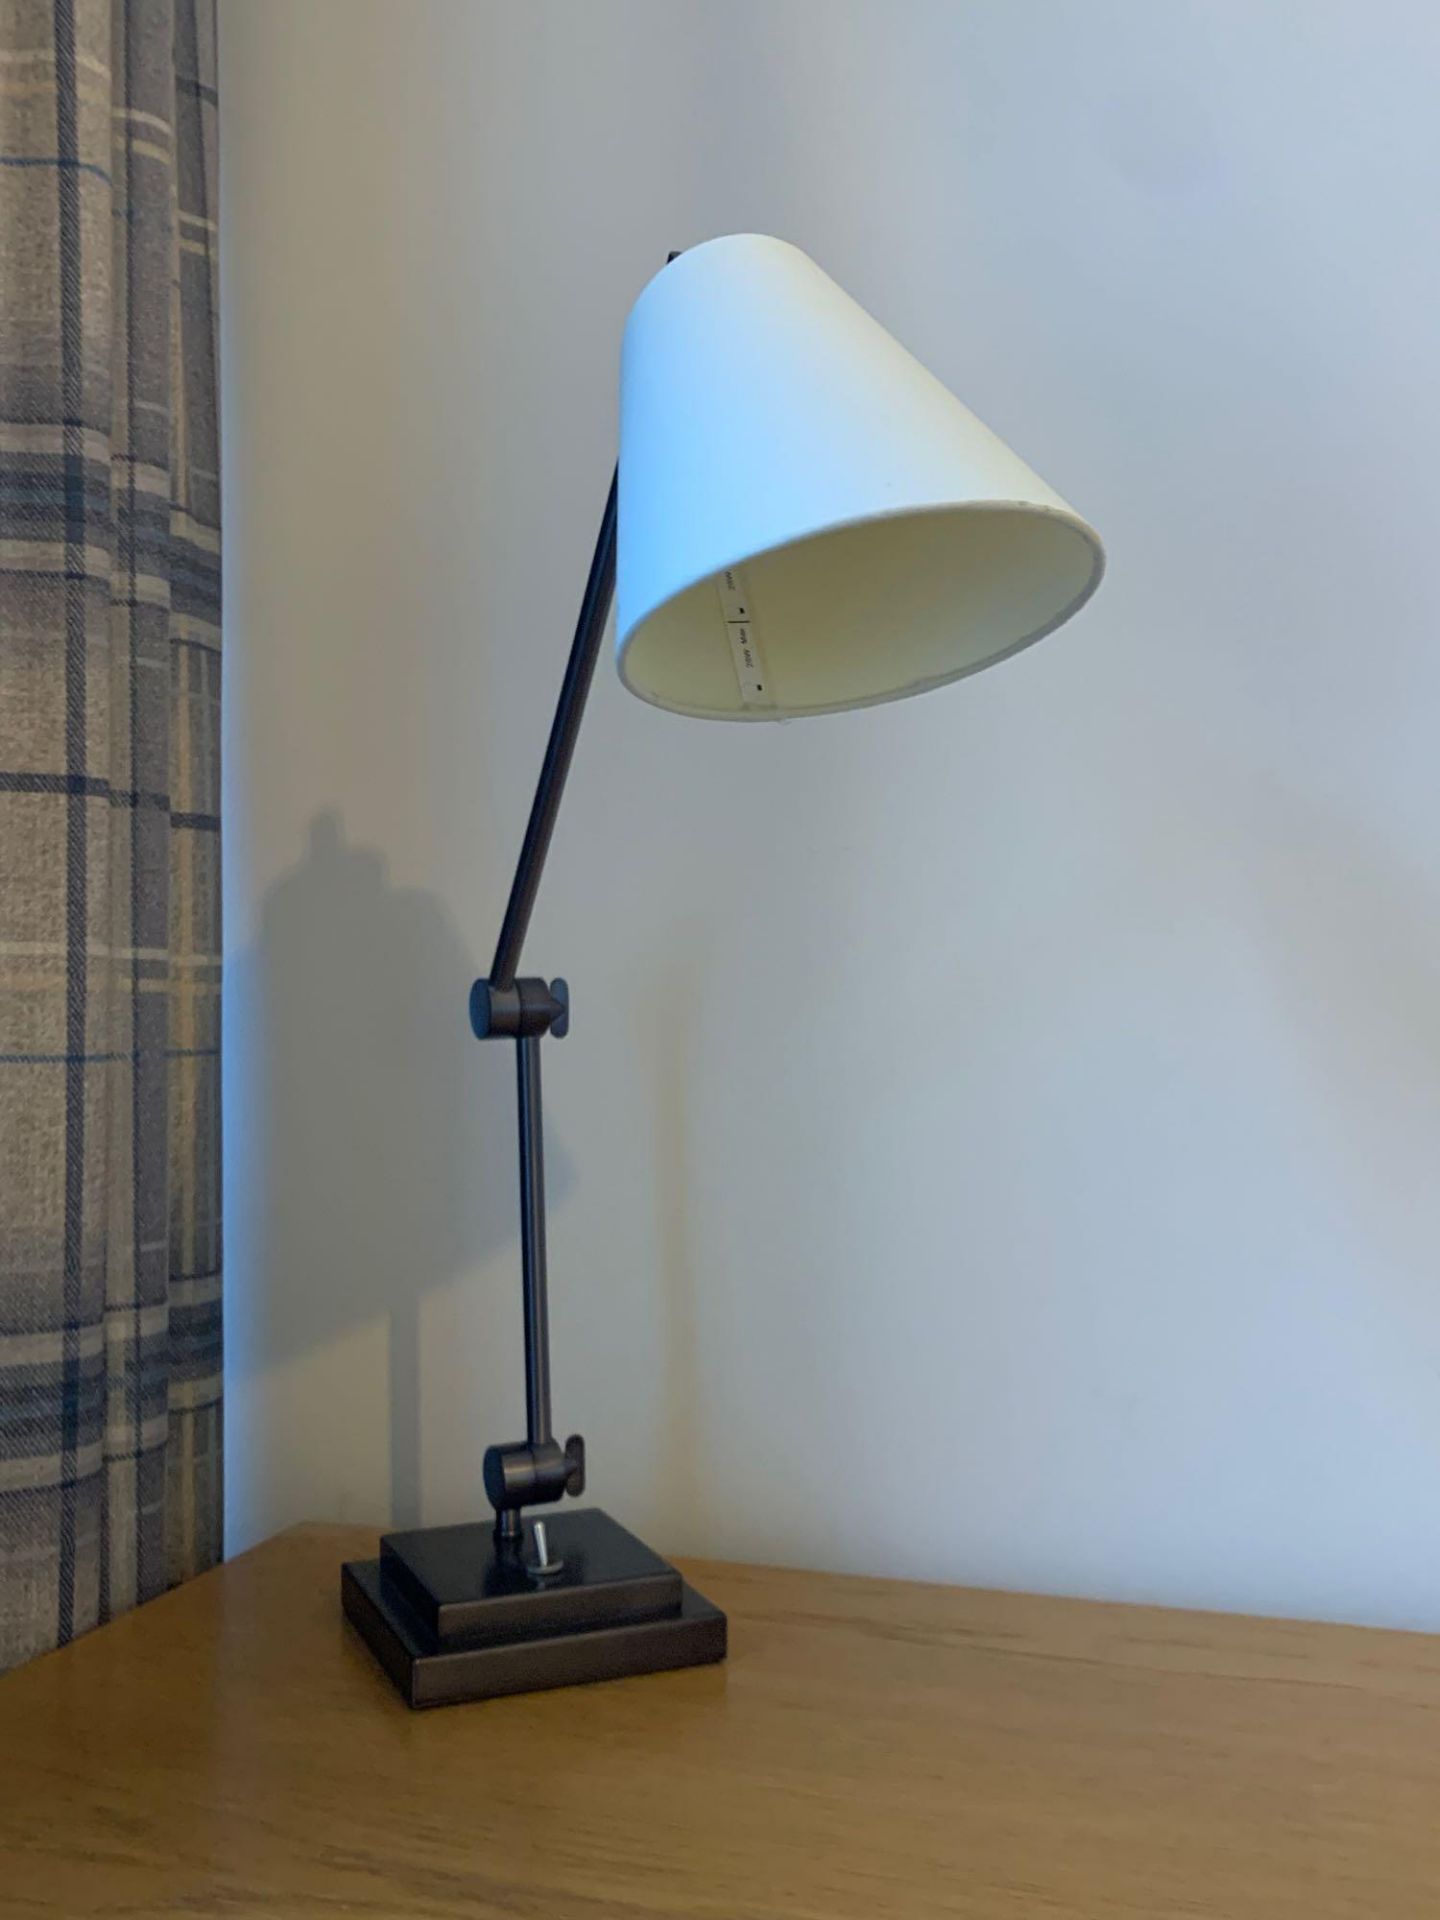 Chelsom desk study desk lamp with heavy stepped base and two toothed locking key swivel joints. base